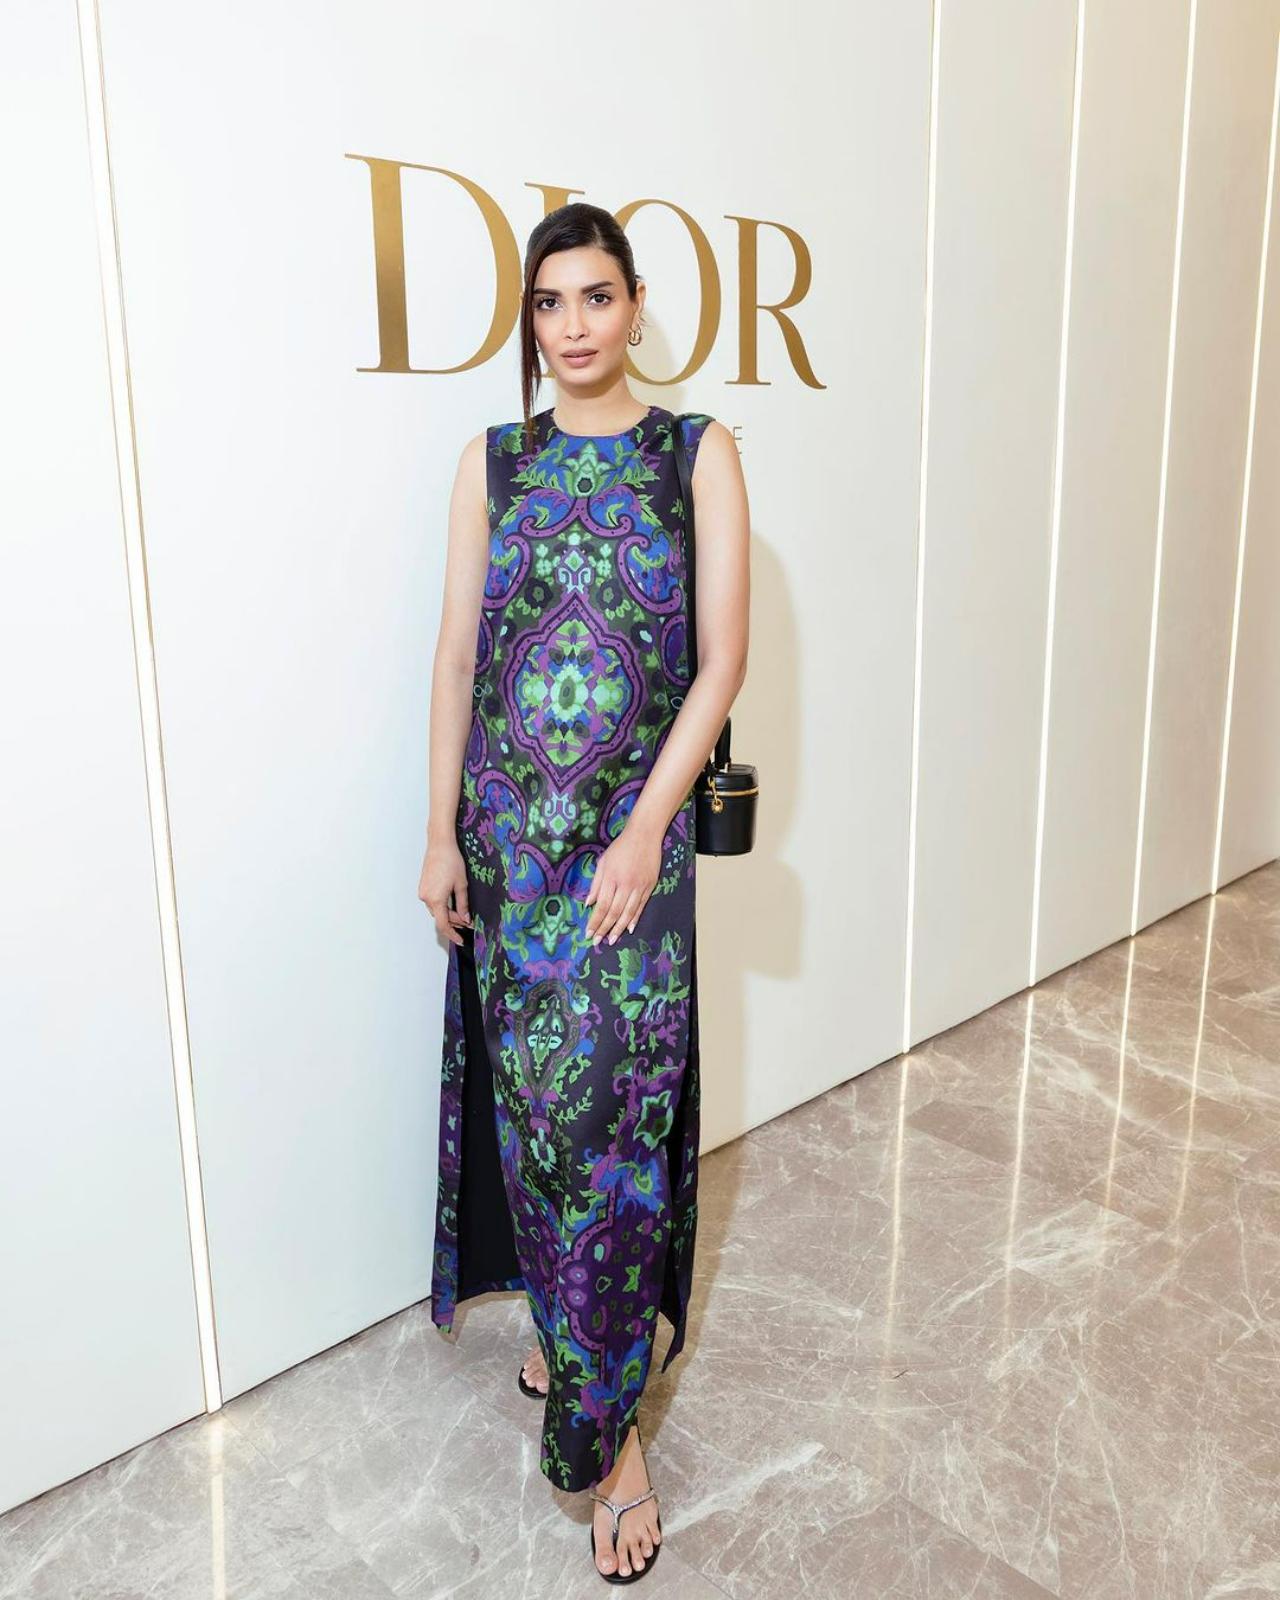 Diana Penty takes Paris by storm in 4 glam outfits, her cream